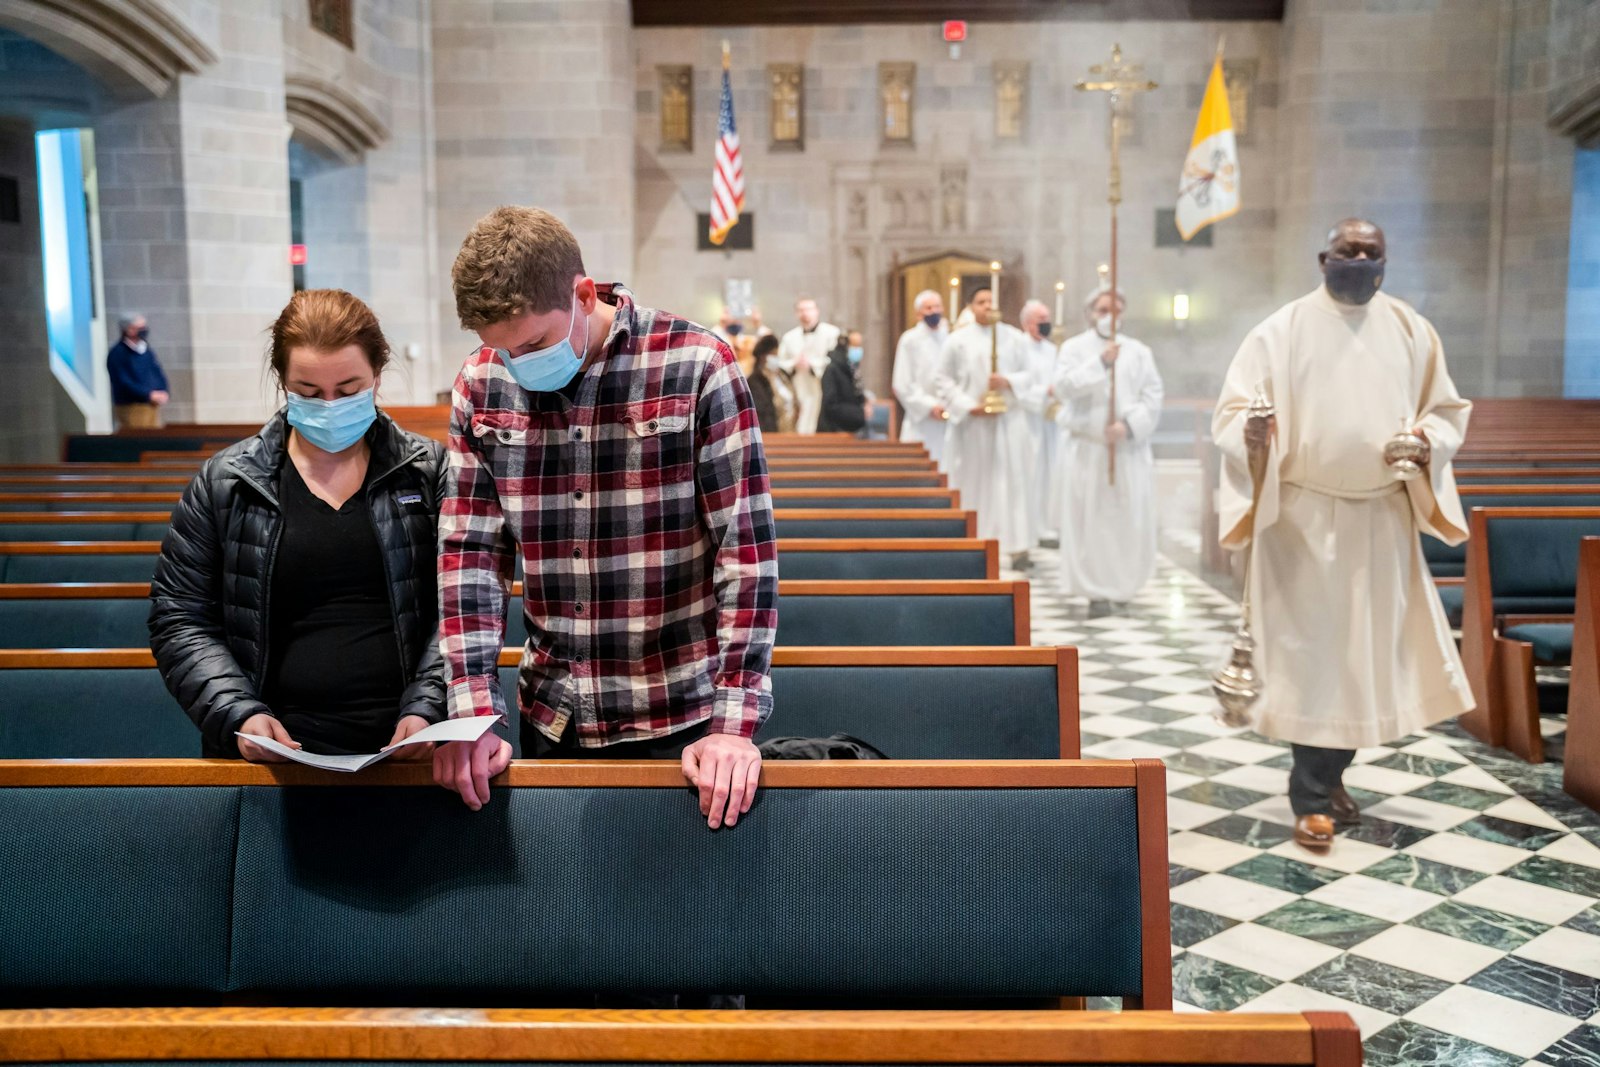 Although attendance was sparse this year because of the ongoing COVID-19 pandemic, Archbishop Vigneron addressed those watching via livestream, as well as those who attended the March for Life this year in Washington, D.C.